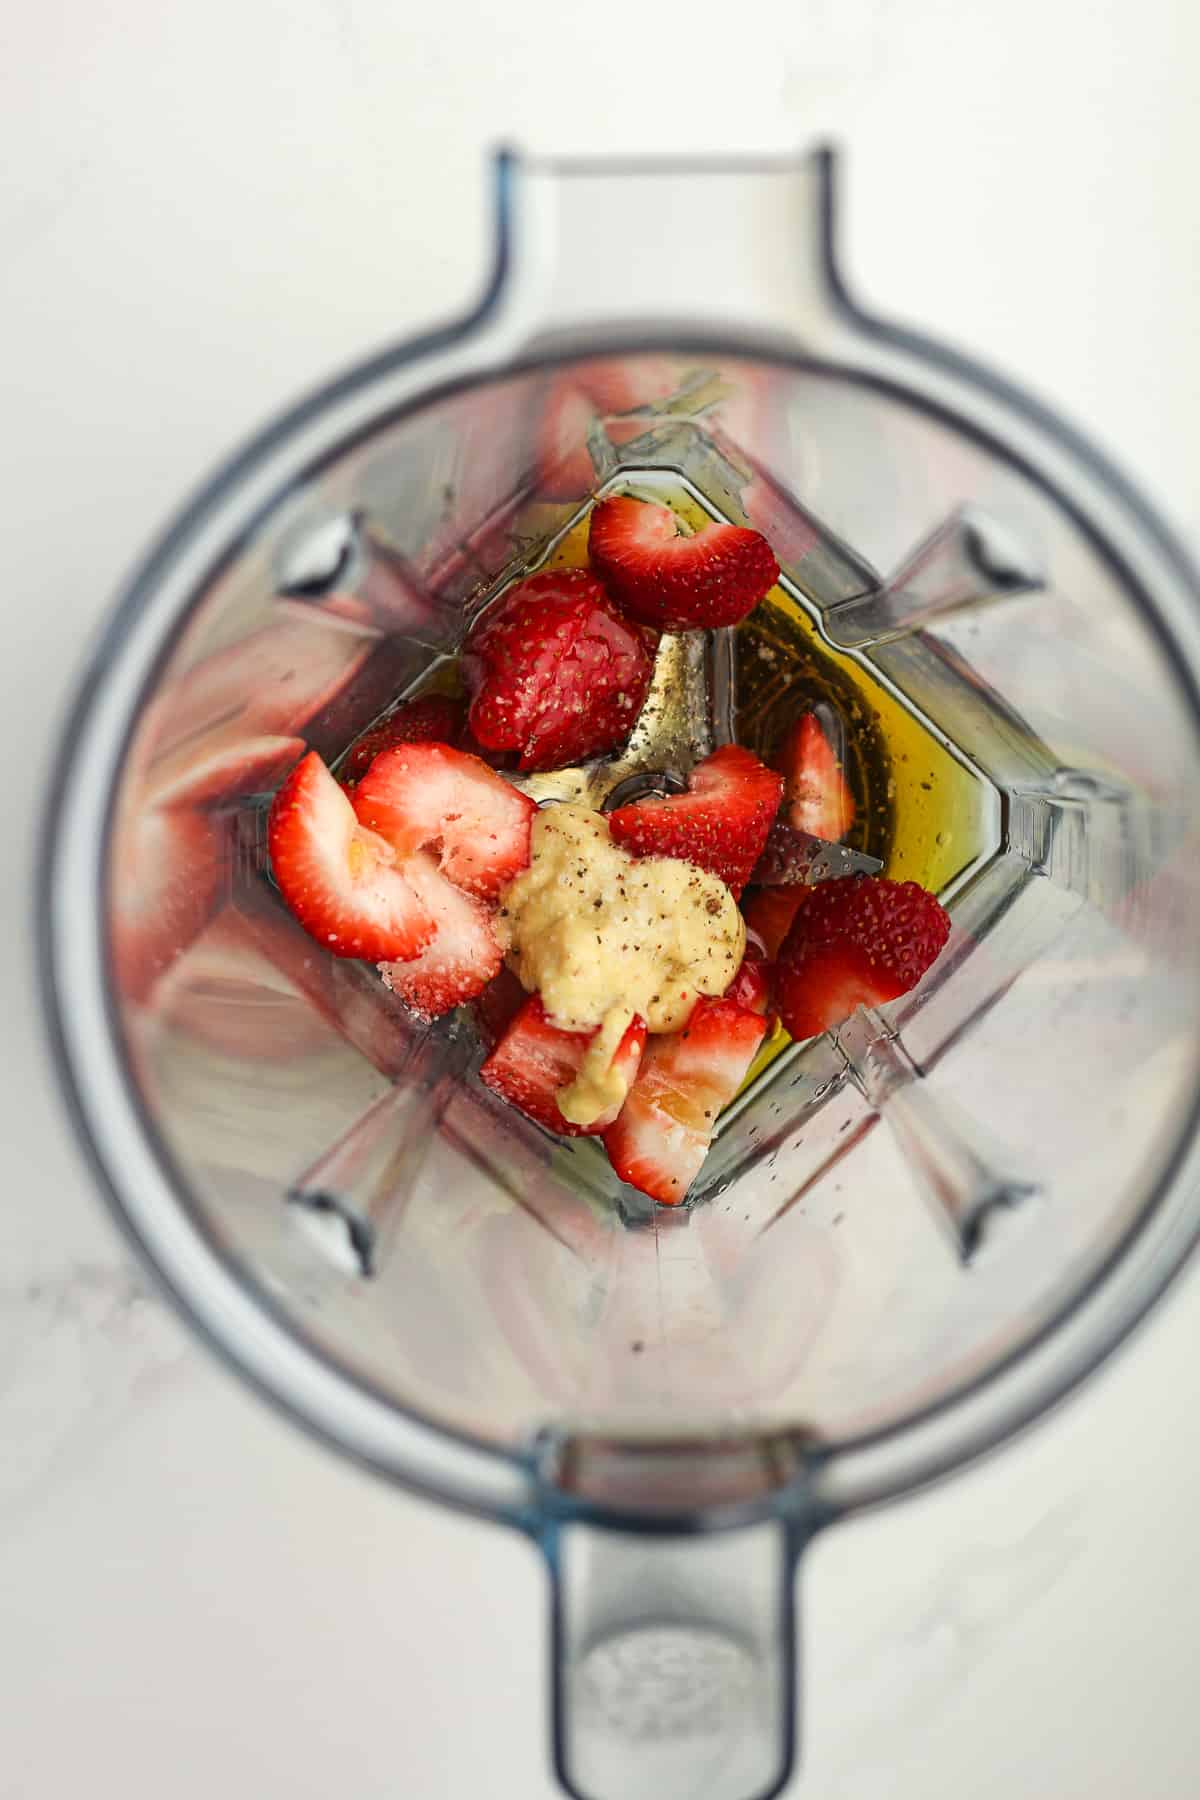 A mixer of the ingredients of the strawberry dressing.